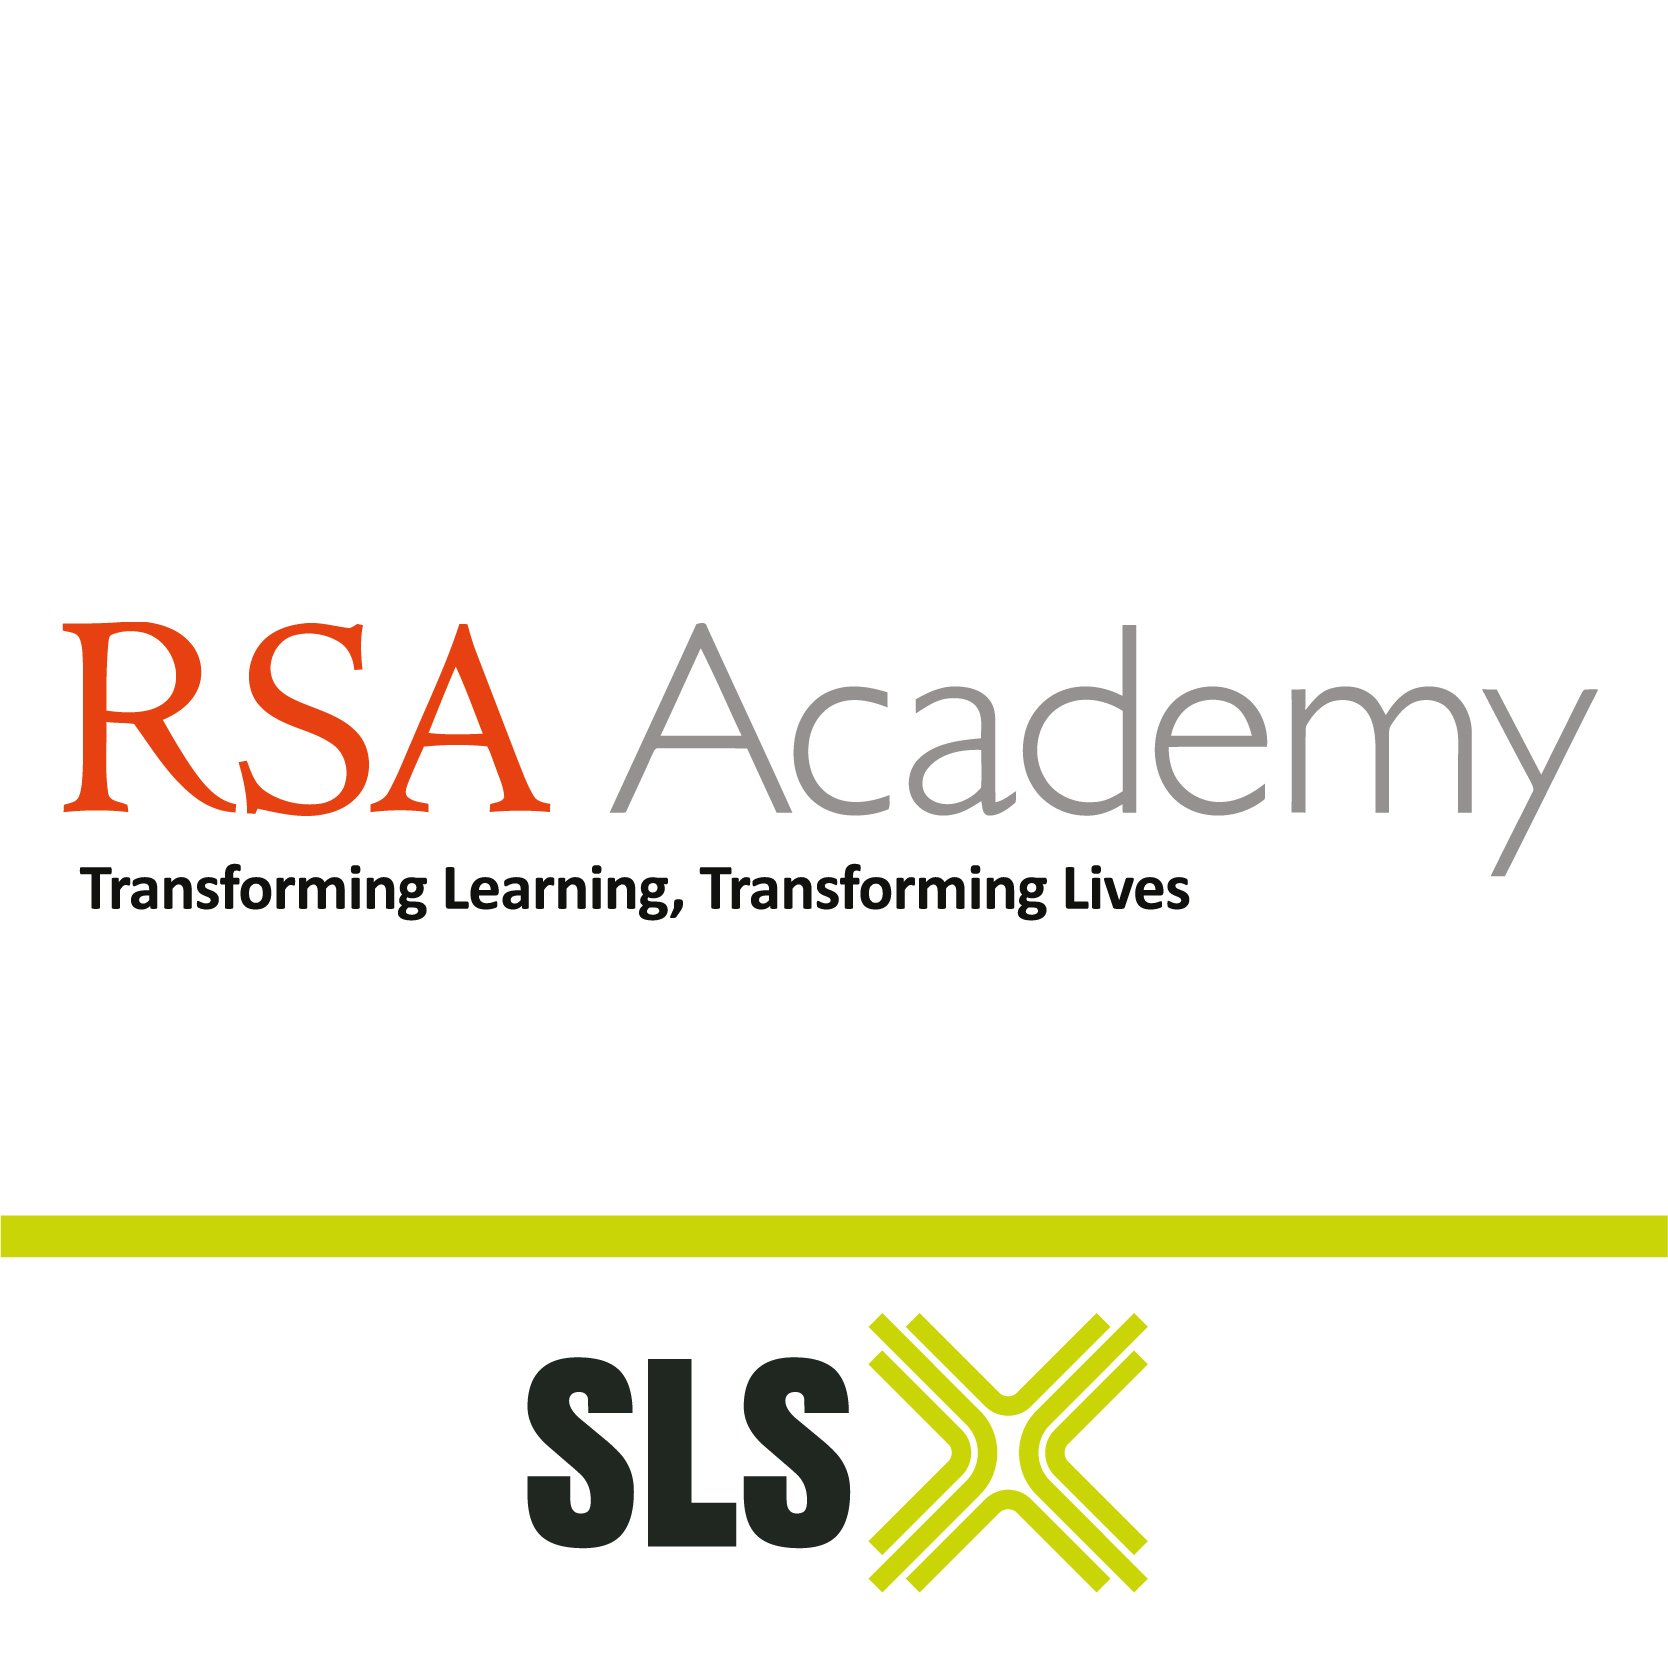 Facilities available for hire in the evenings, weekends and school holidays. Contact 0121 514 8840 or email rsaacademy@schoollettings.org #SchoolLettings #SLS